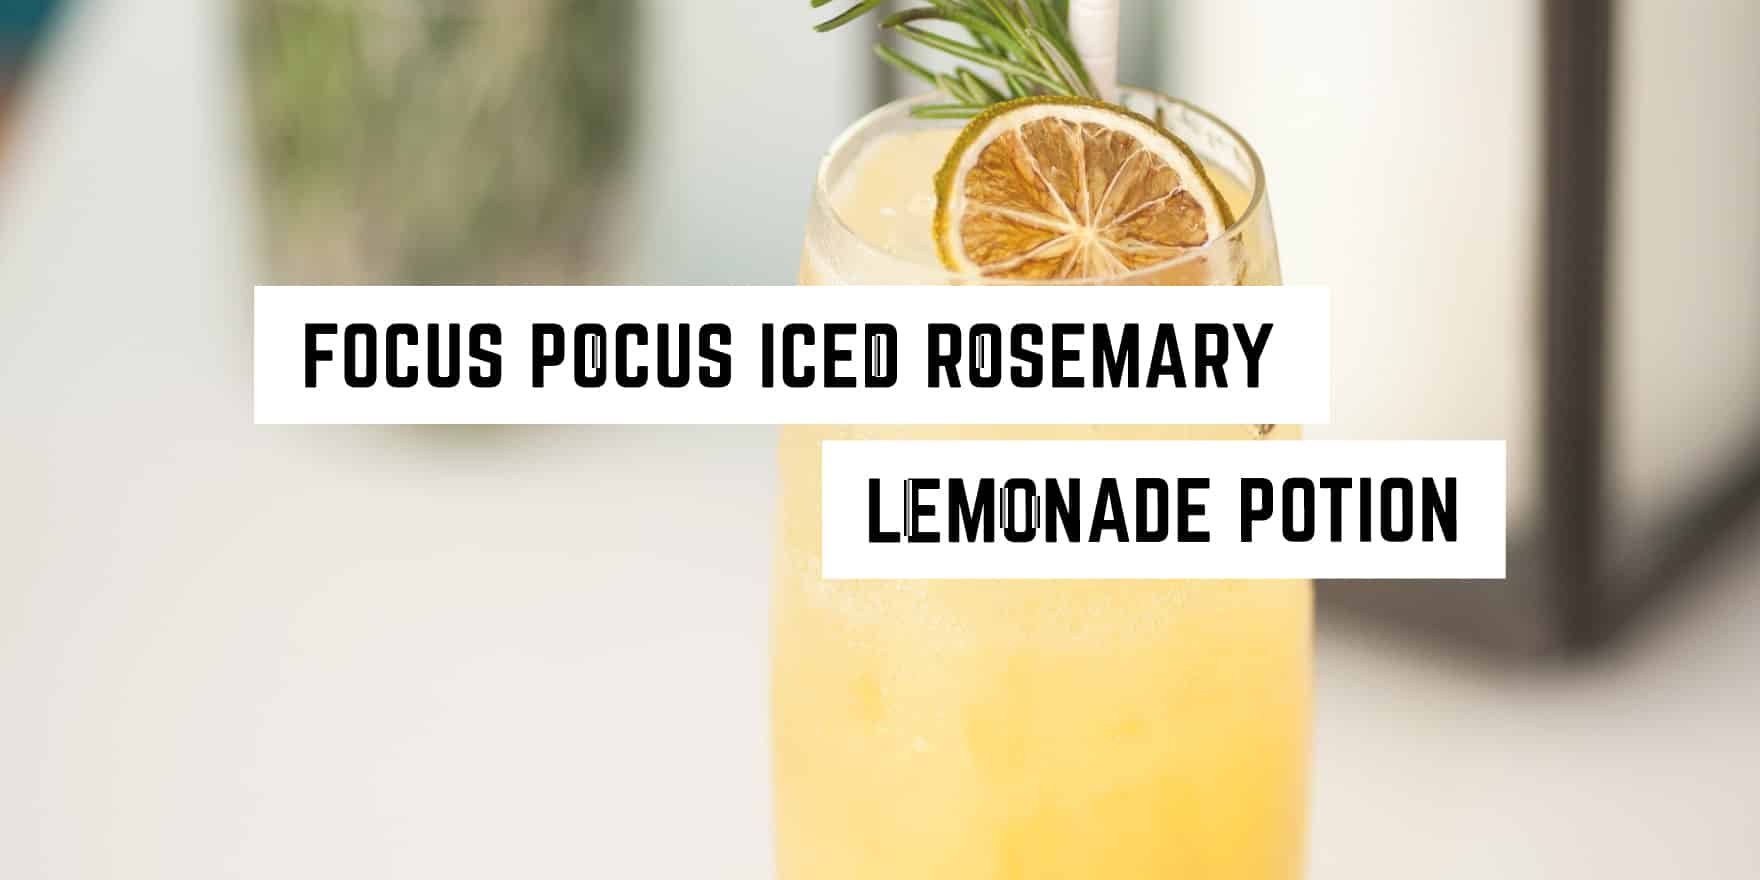 A refreshing glass of rosemary-infused lemonade garnished with a sprig of rosemary and a slice of lemon, playfully dubbed as a "focus pocus iced rosemary lemonade